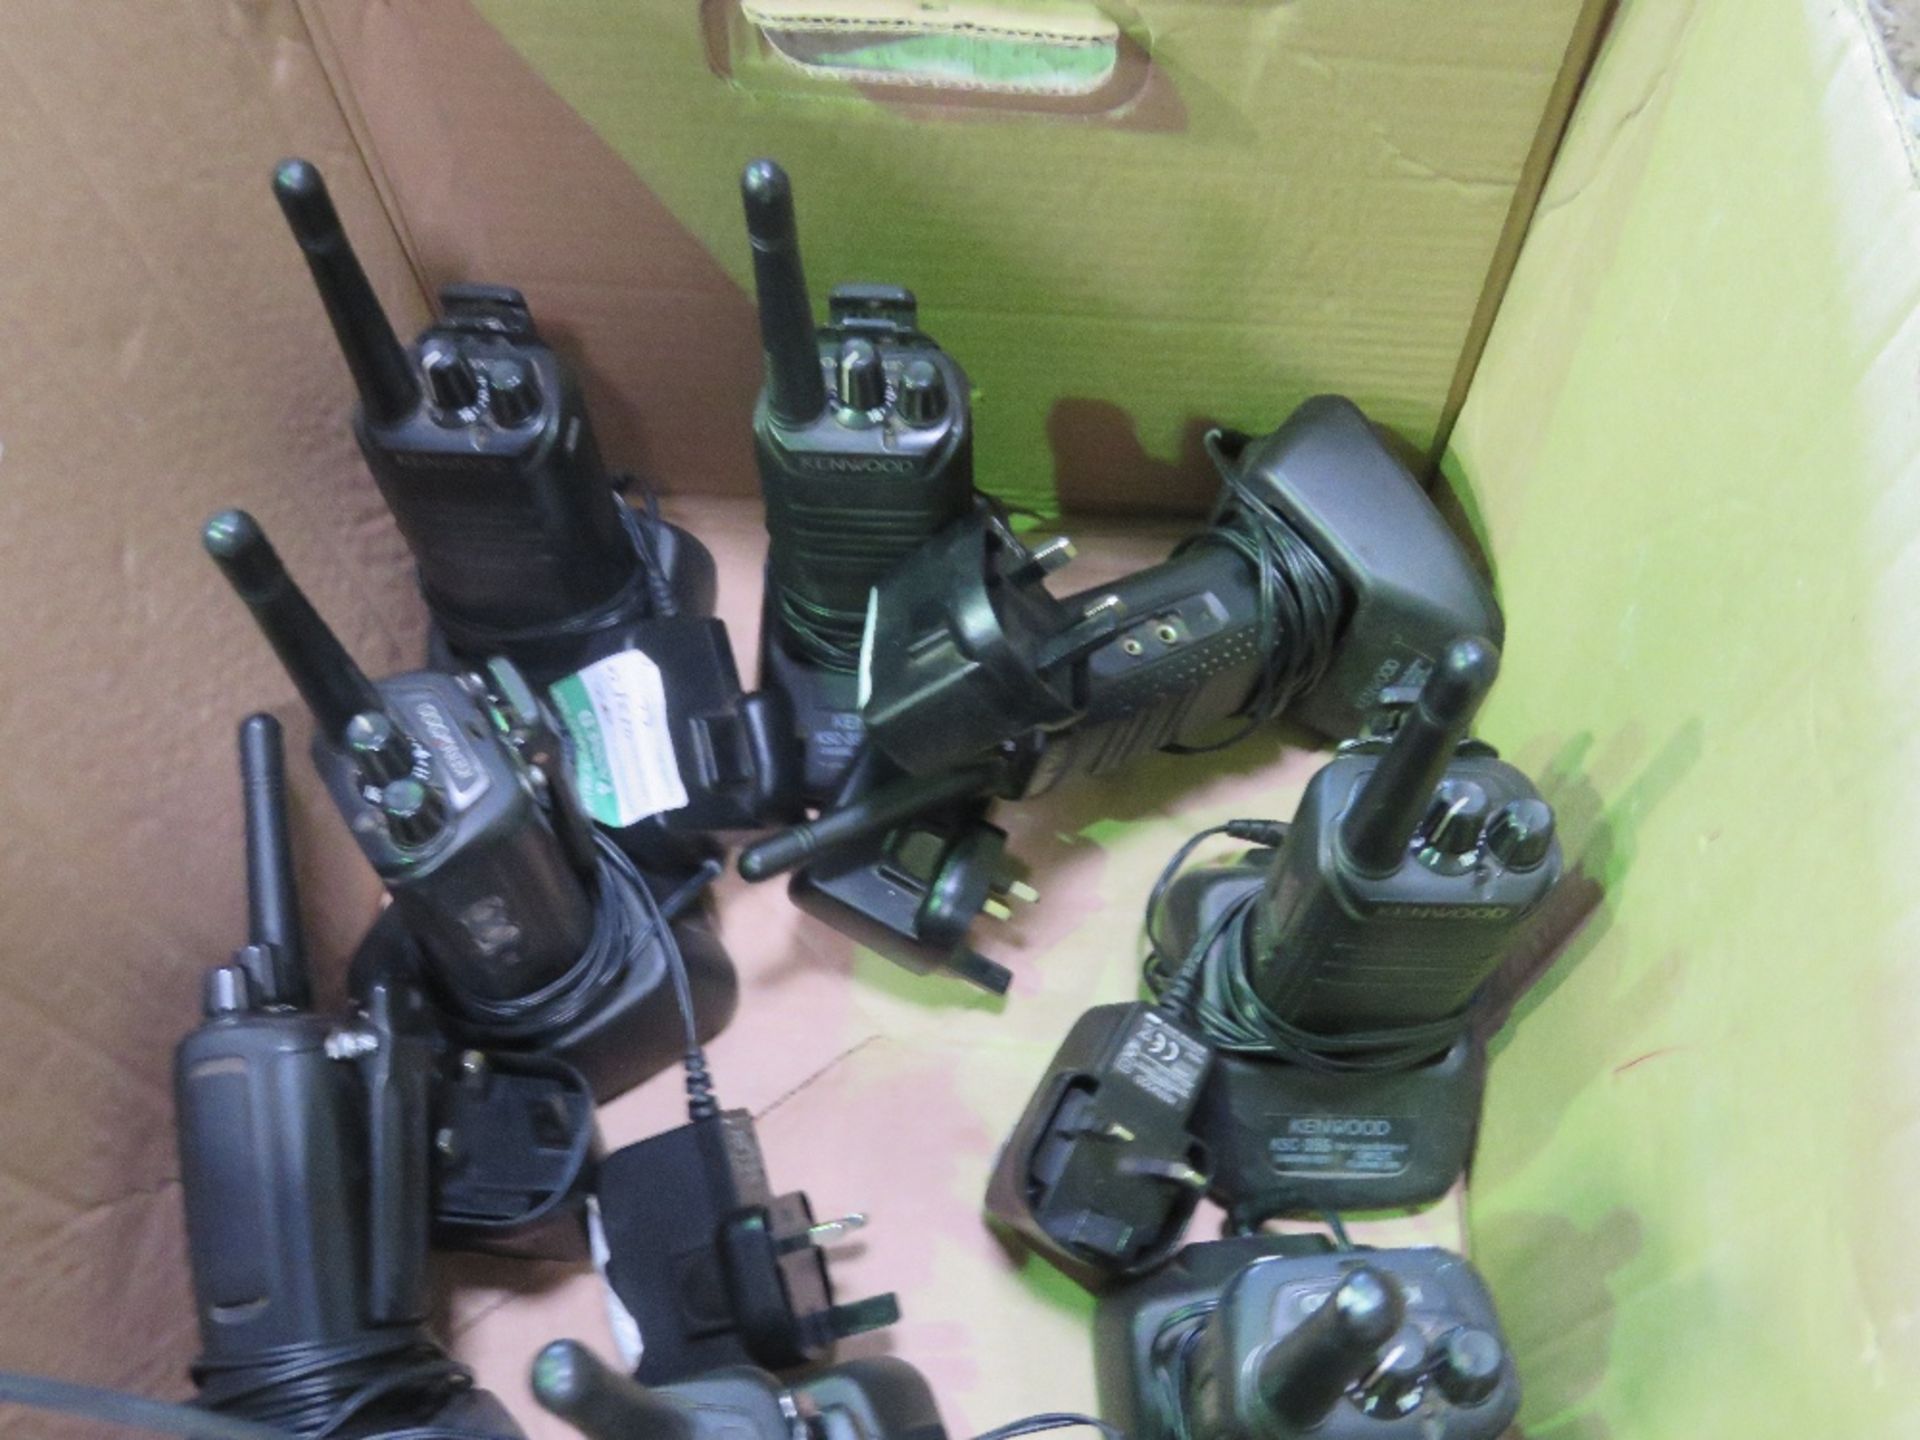 9NO KENWOOD WALKIE TALKIE RADIOS WITH CHARGERS. DIRECT FROM SITE CLOSURE. WORKING WHEN REMOVED. T - Image 4 of 4